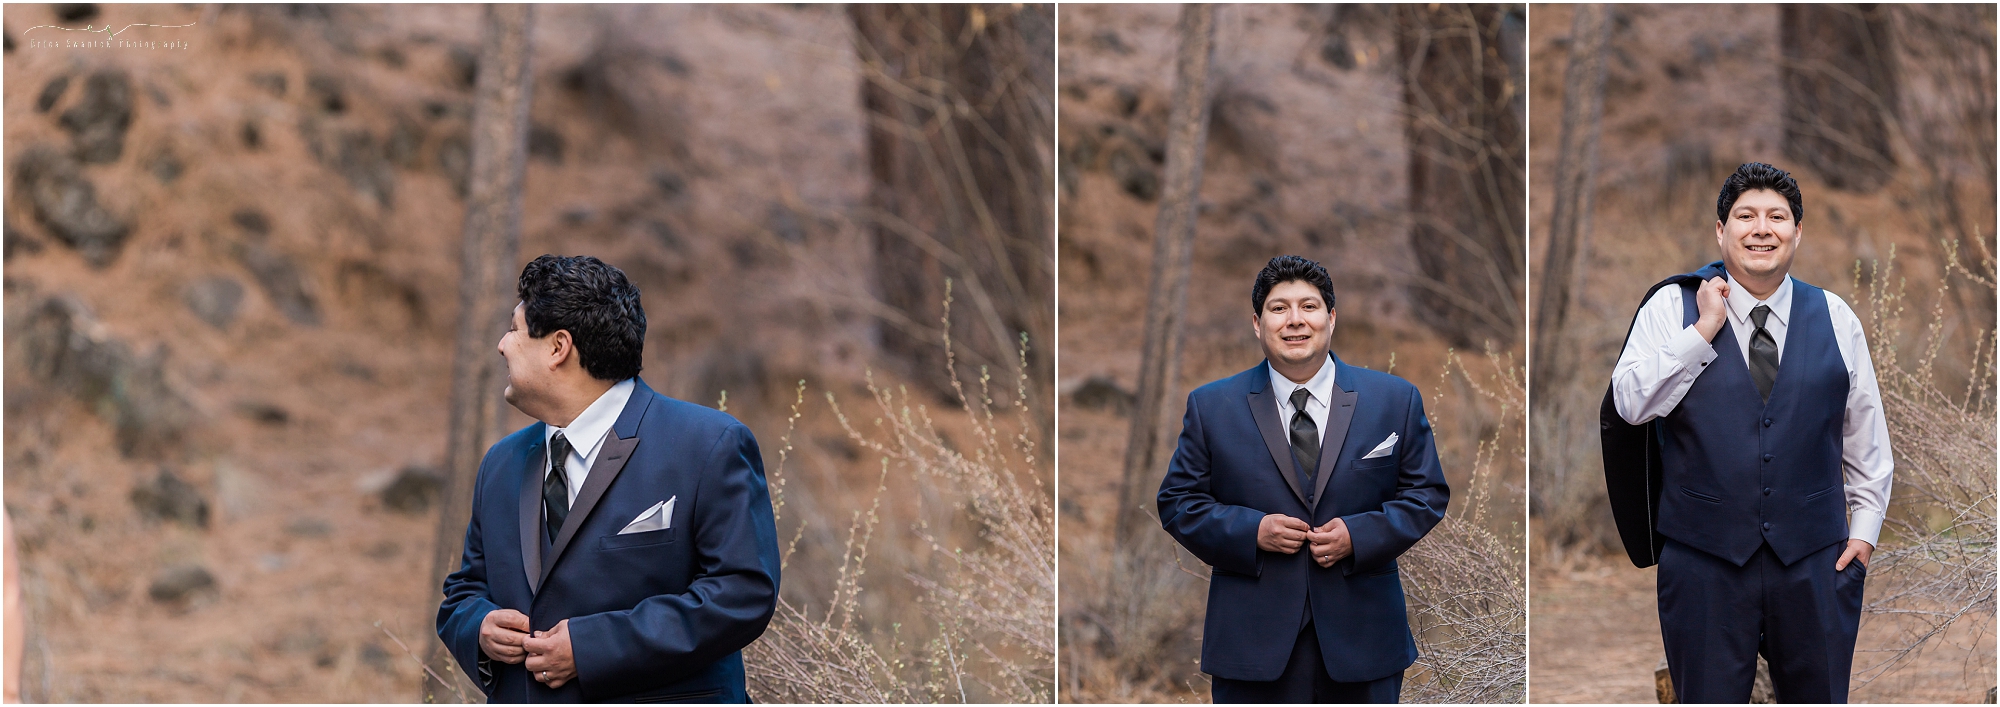 A handsome groom posing for some formal portraits at his wedding in Central Oregon. 